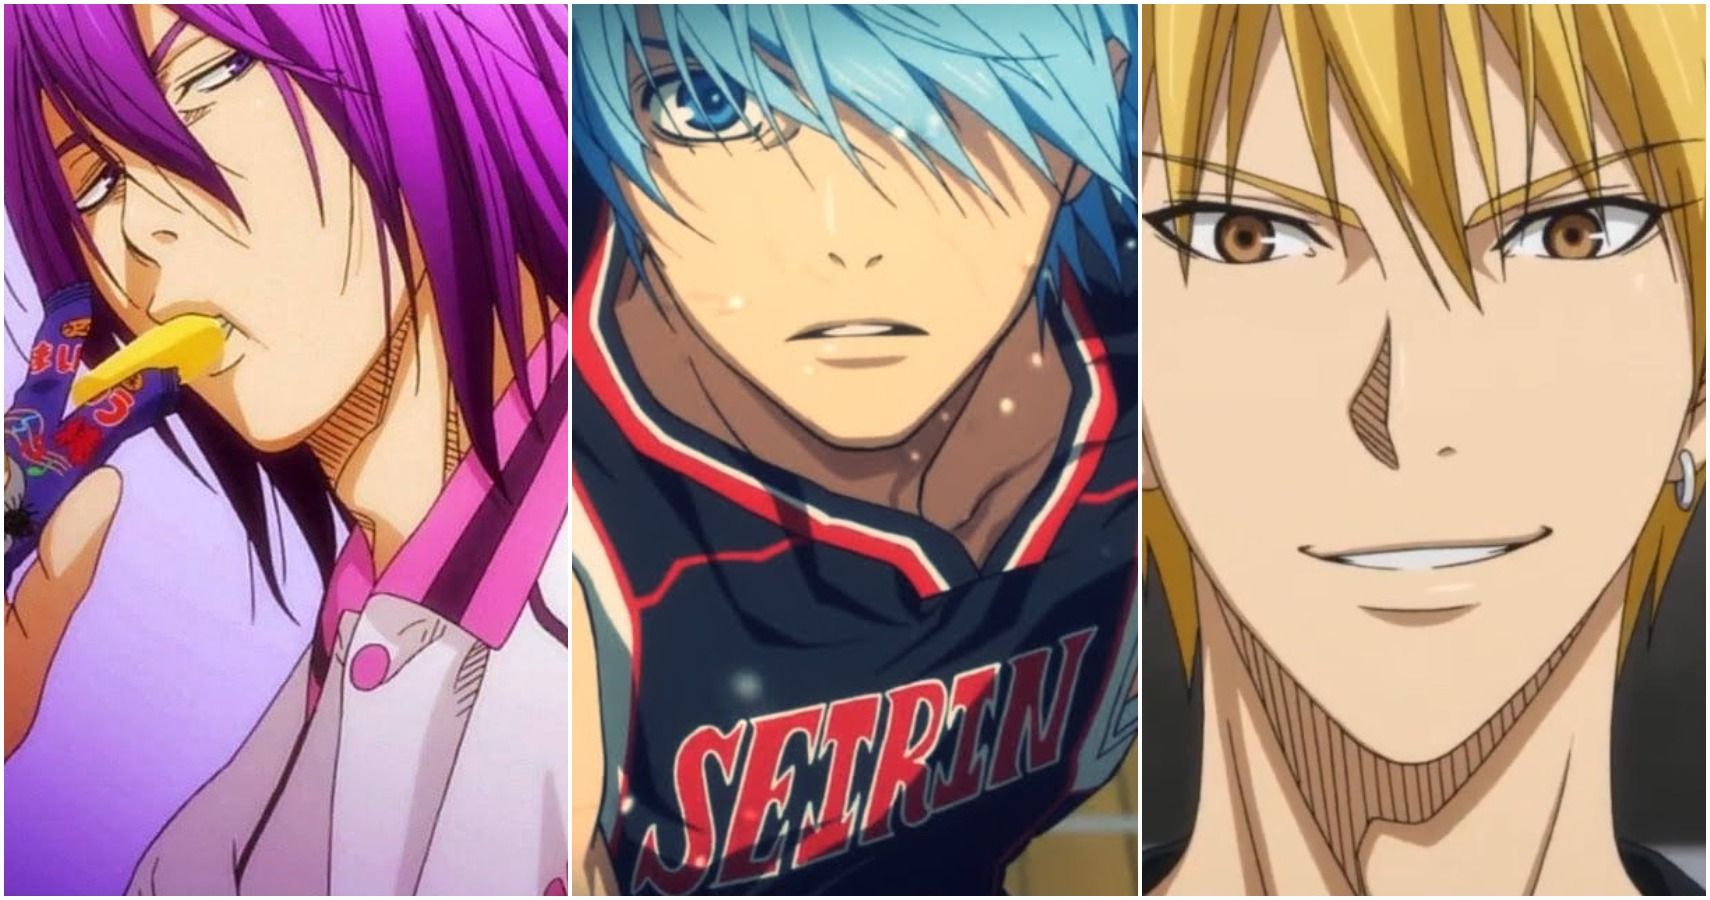 Which Kuroko No Basket Character Are You Based On Your Zodiac Sign?